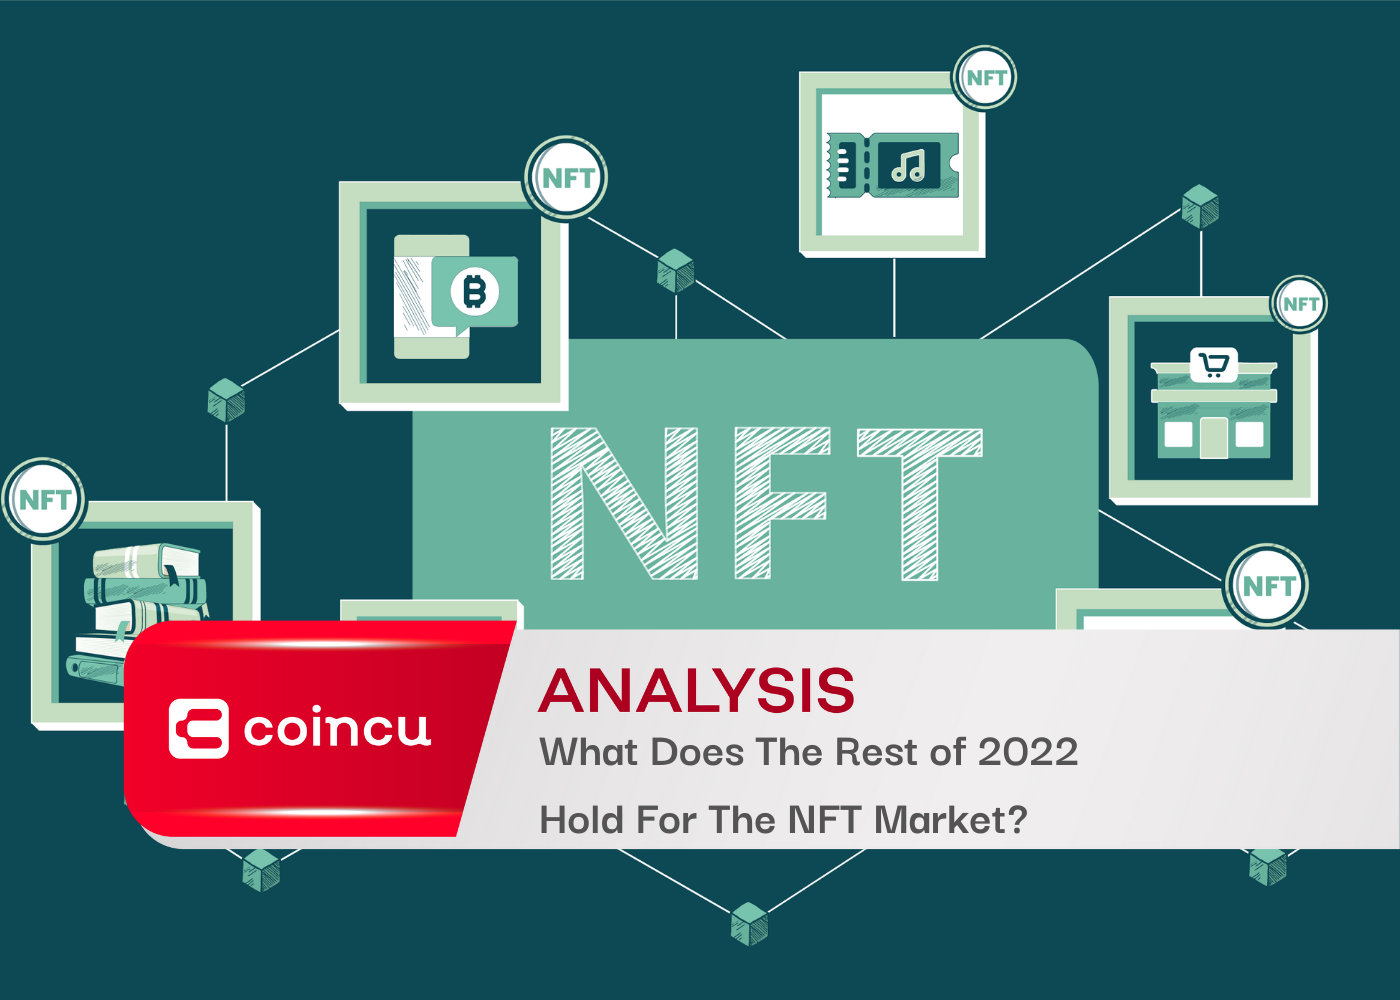 What Does The Rest of 2022 Hold For The NFT Market?